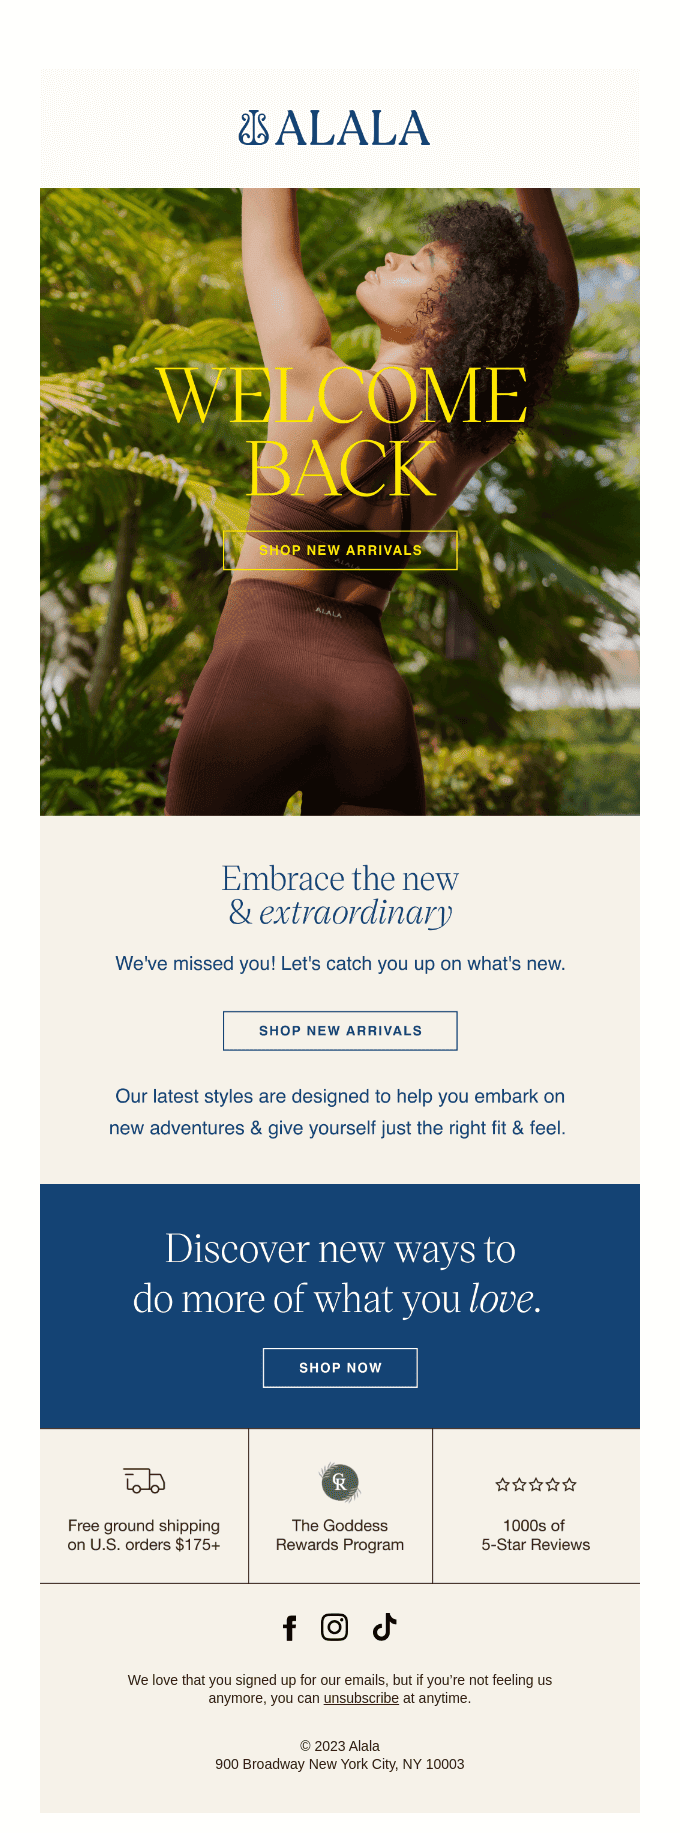 re-engagement email personalization example by Alala eCommerce brand for women